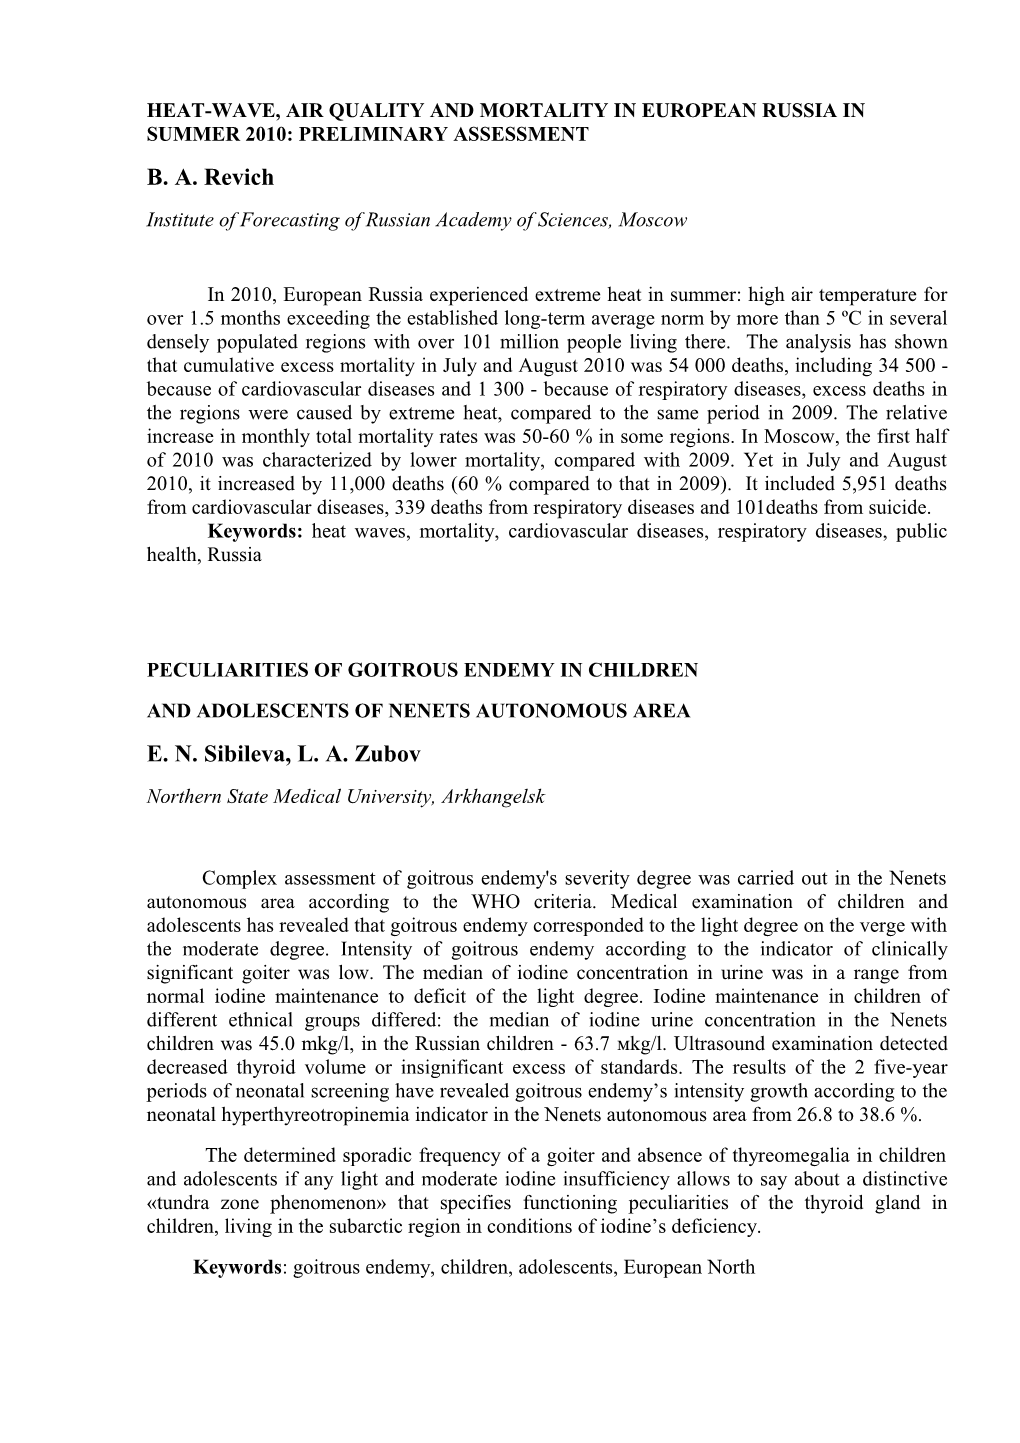 Heat-Wave, Air Quality and Mortality in European Russia in Summer 2010: Preliminary Assessment